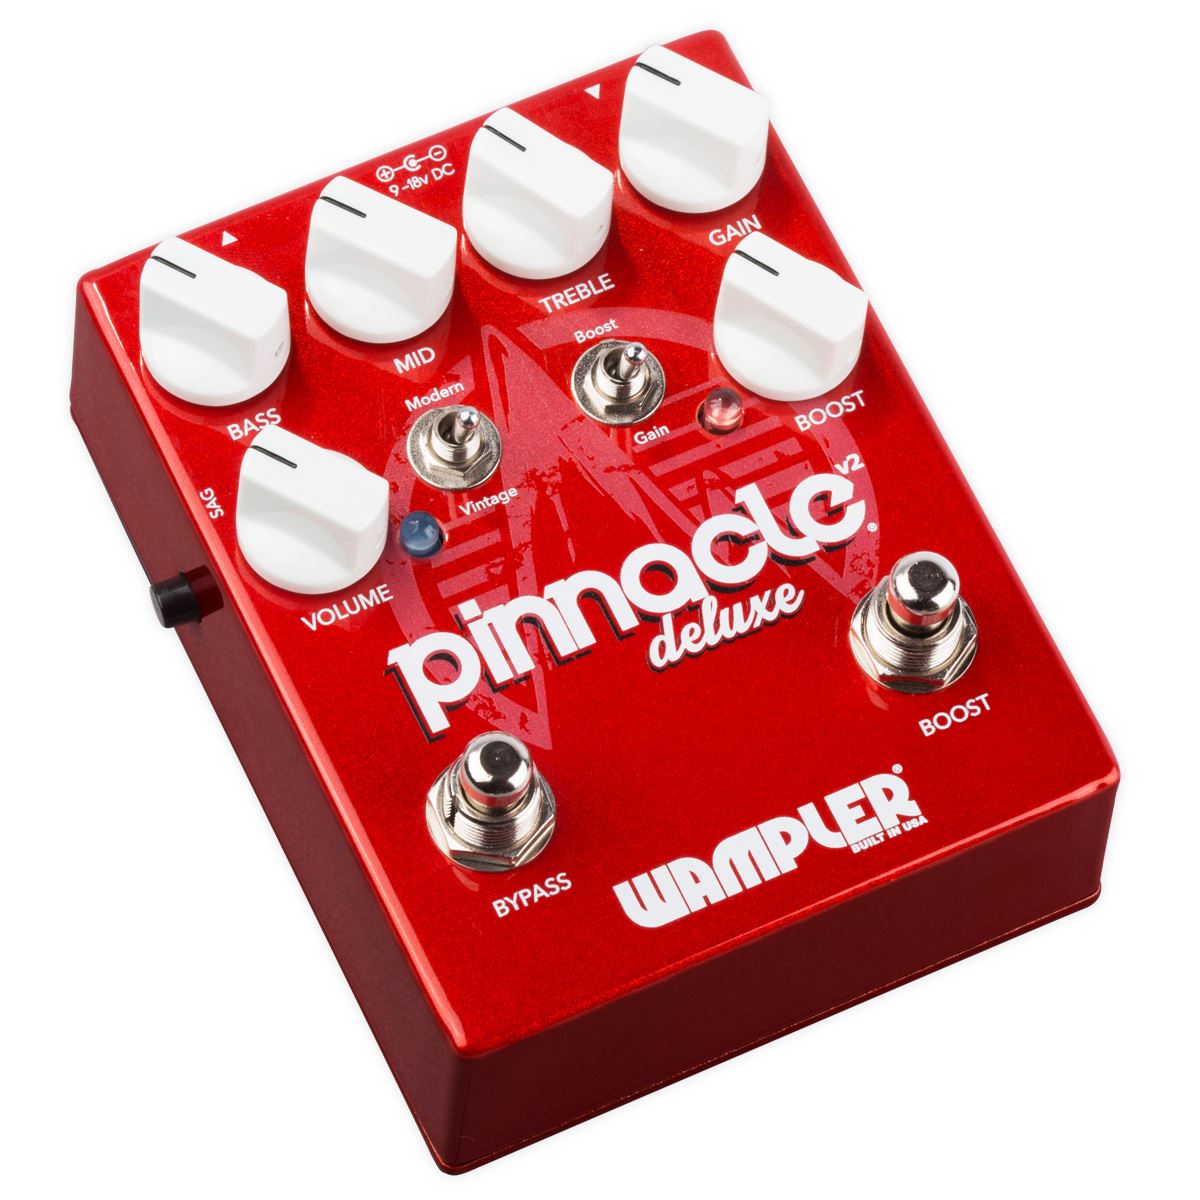 Wampler Pedals Pinnacle Deluxe V2 Distortion